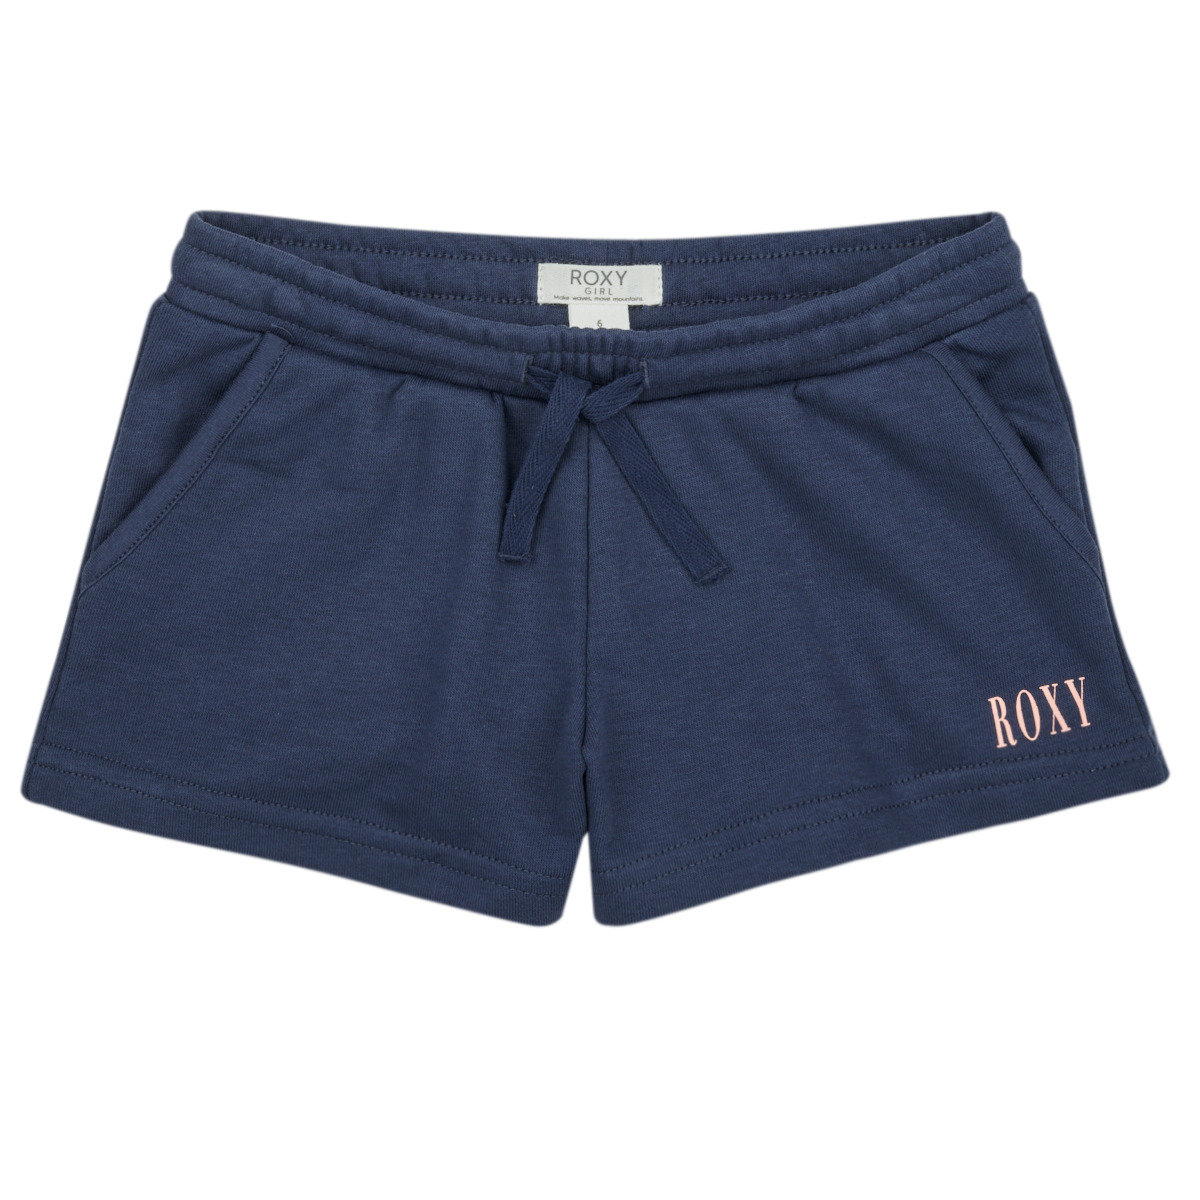 Child Free Roxy ! ORIGIN Marine Clothing Spartoo FOREVER - delivery Shorts SHORT / NET Bermudas HAPPINESS | -